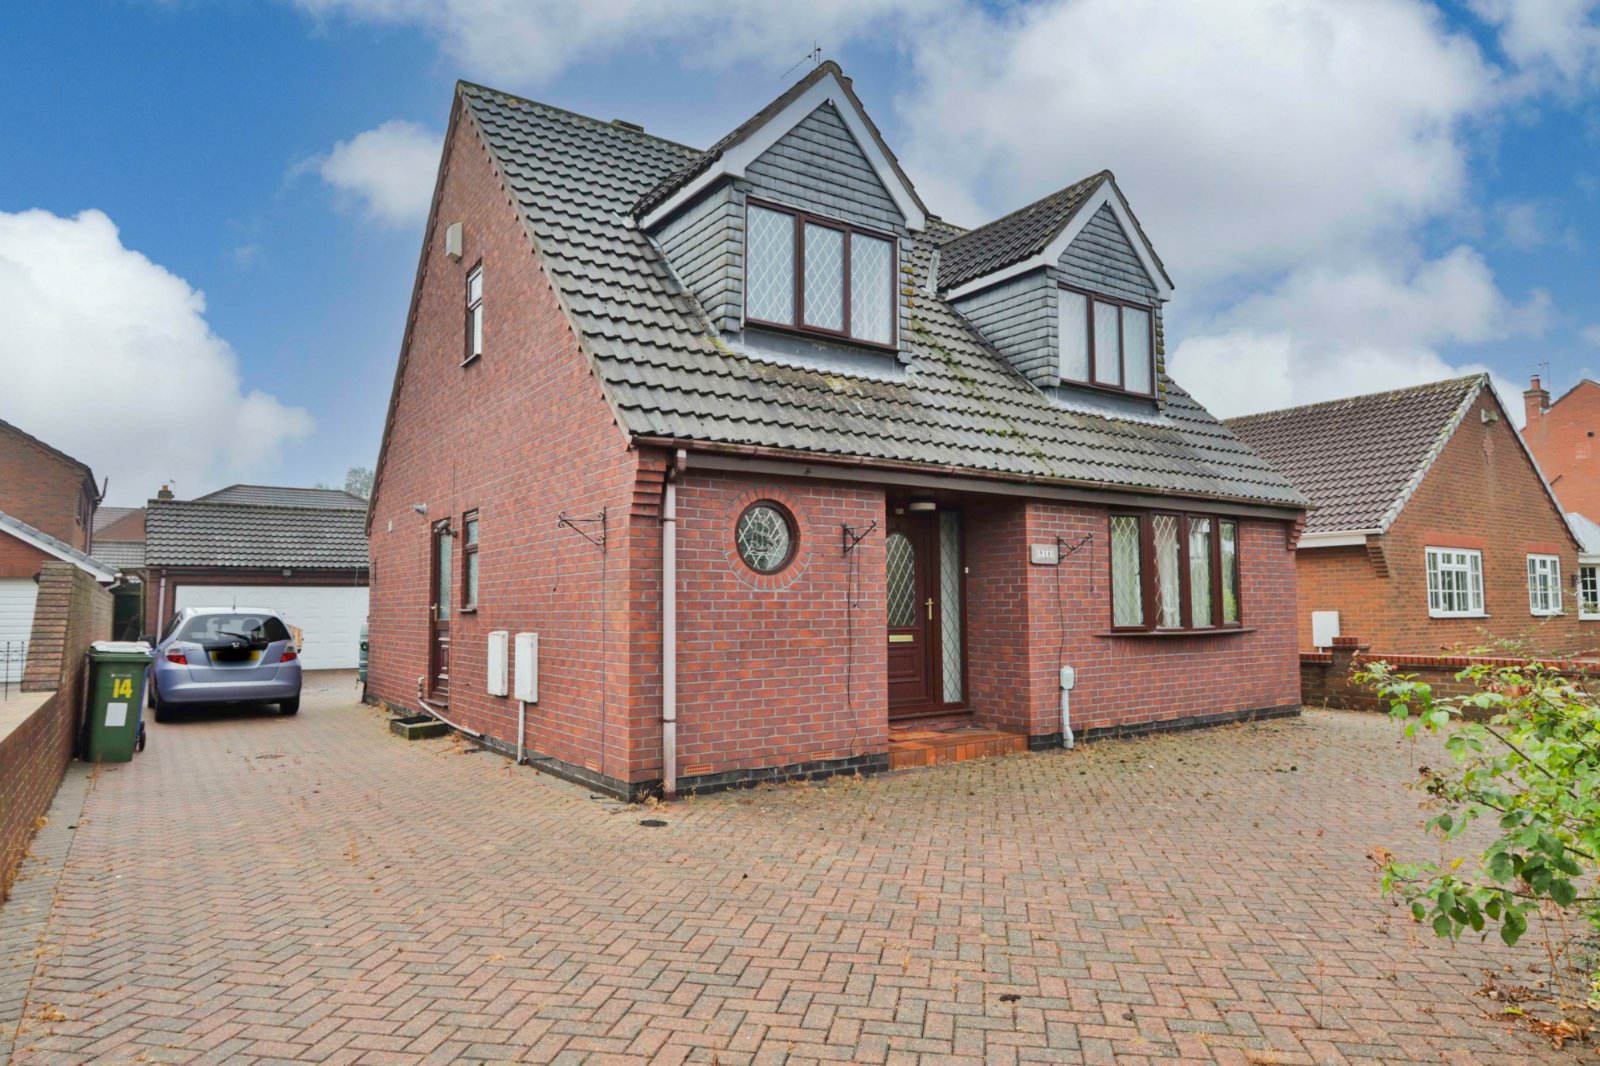 2 bed house for sale in Bond Street, Hedon 0